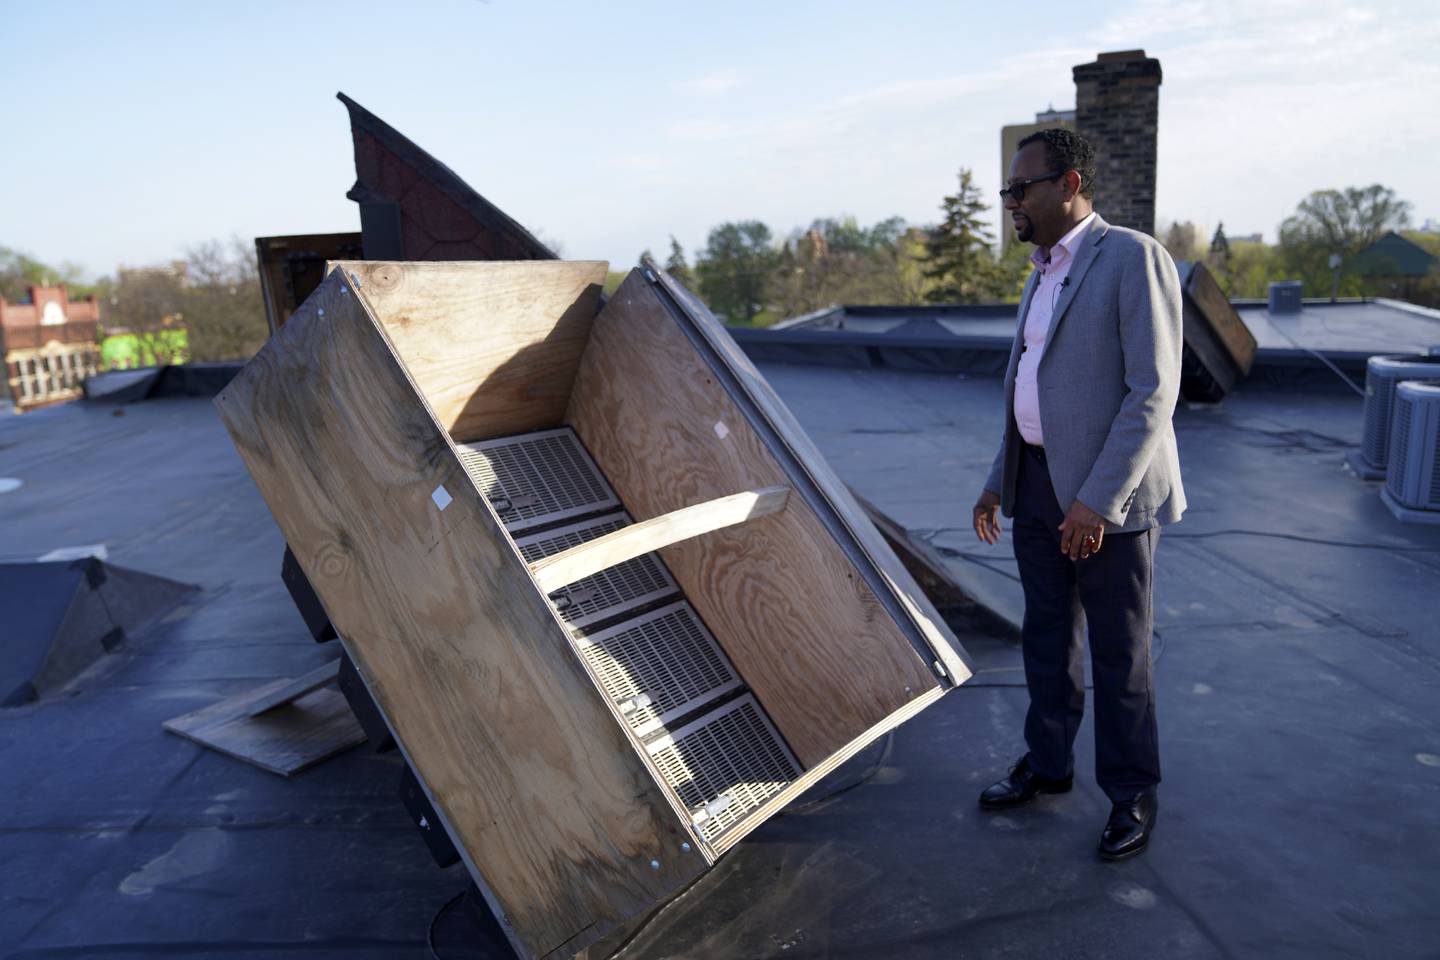 Wali Dirie, executive director of the Islamic Civic Society of America Dar Al-Hijrah mosque, opens rooftop speakers used to publicly broadcast the call to prayer in Minneapolis. AP